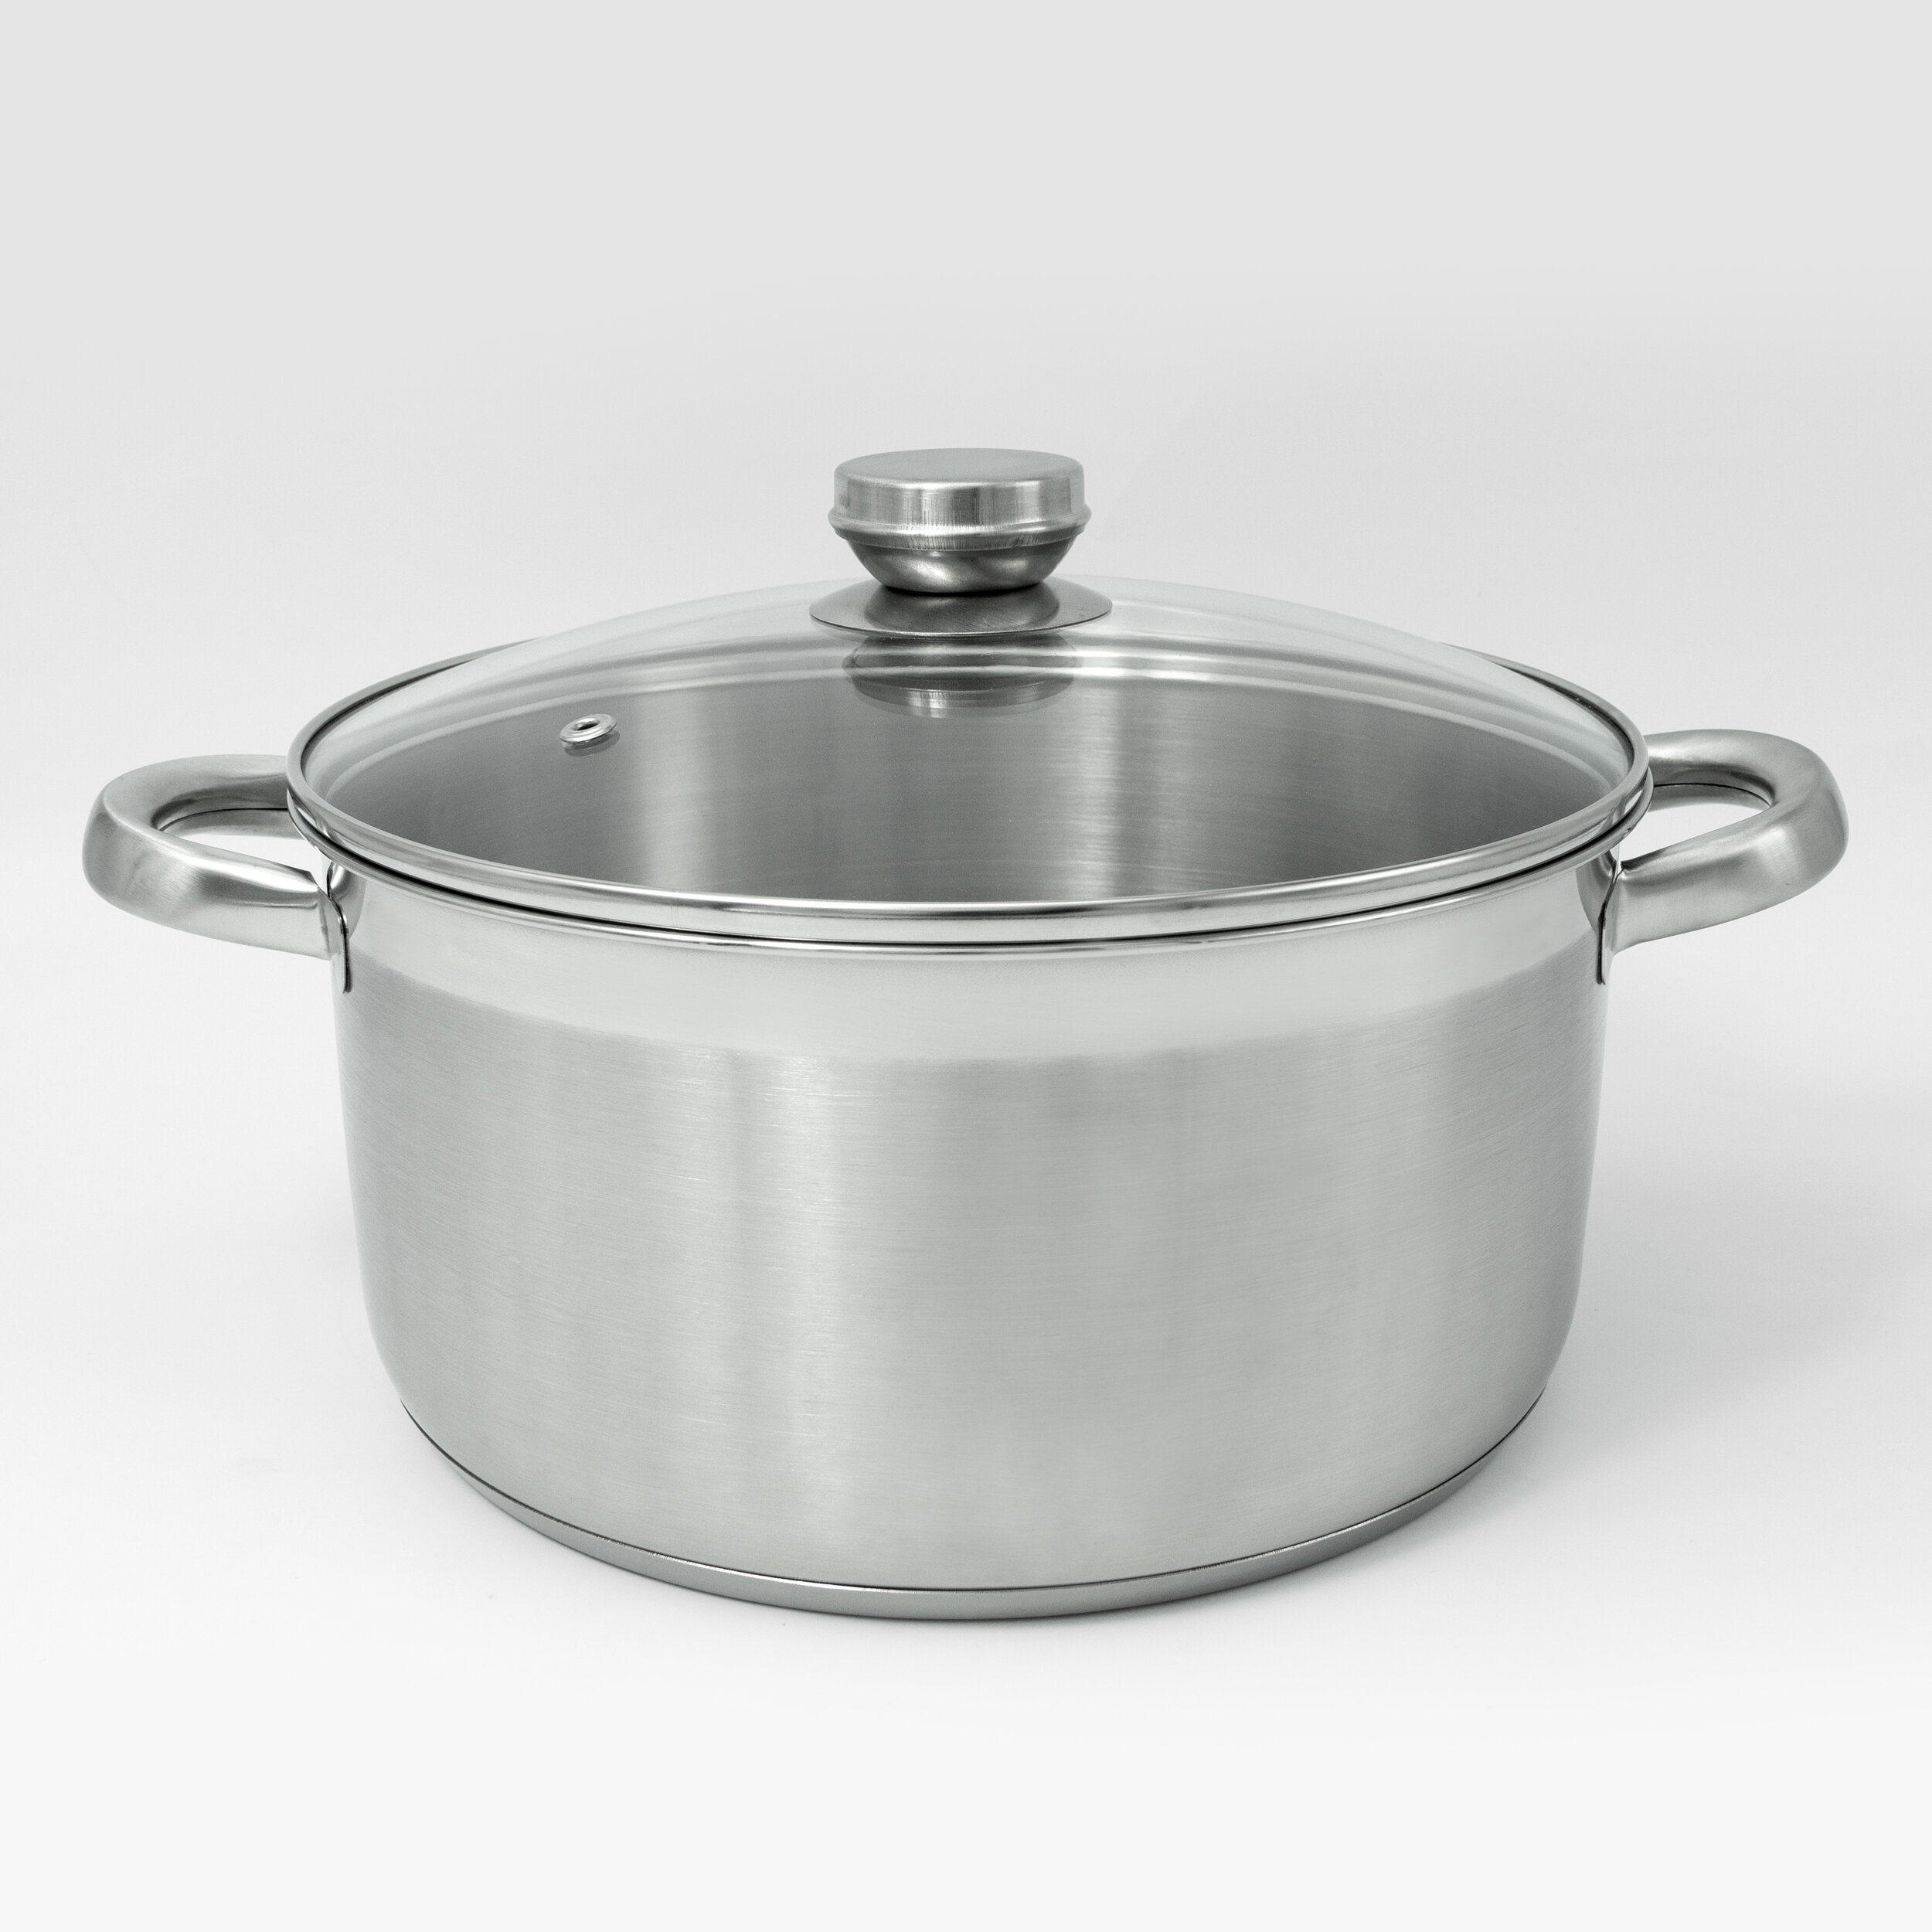 Cooks Standard 7-Quart Classic Stainless Steel Dutch Oven Casserole Stockpot with Lid